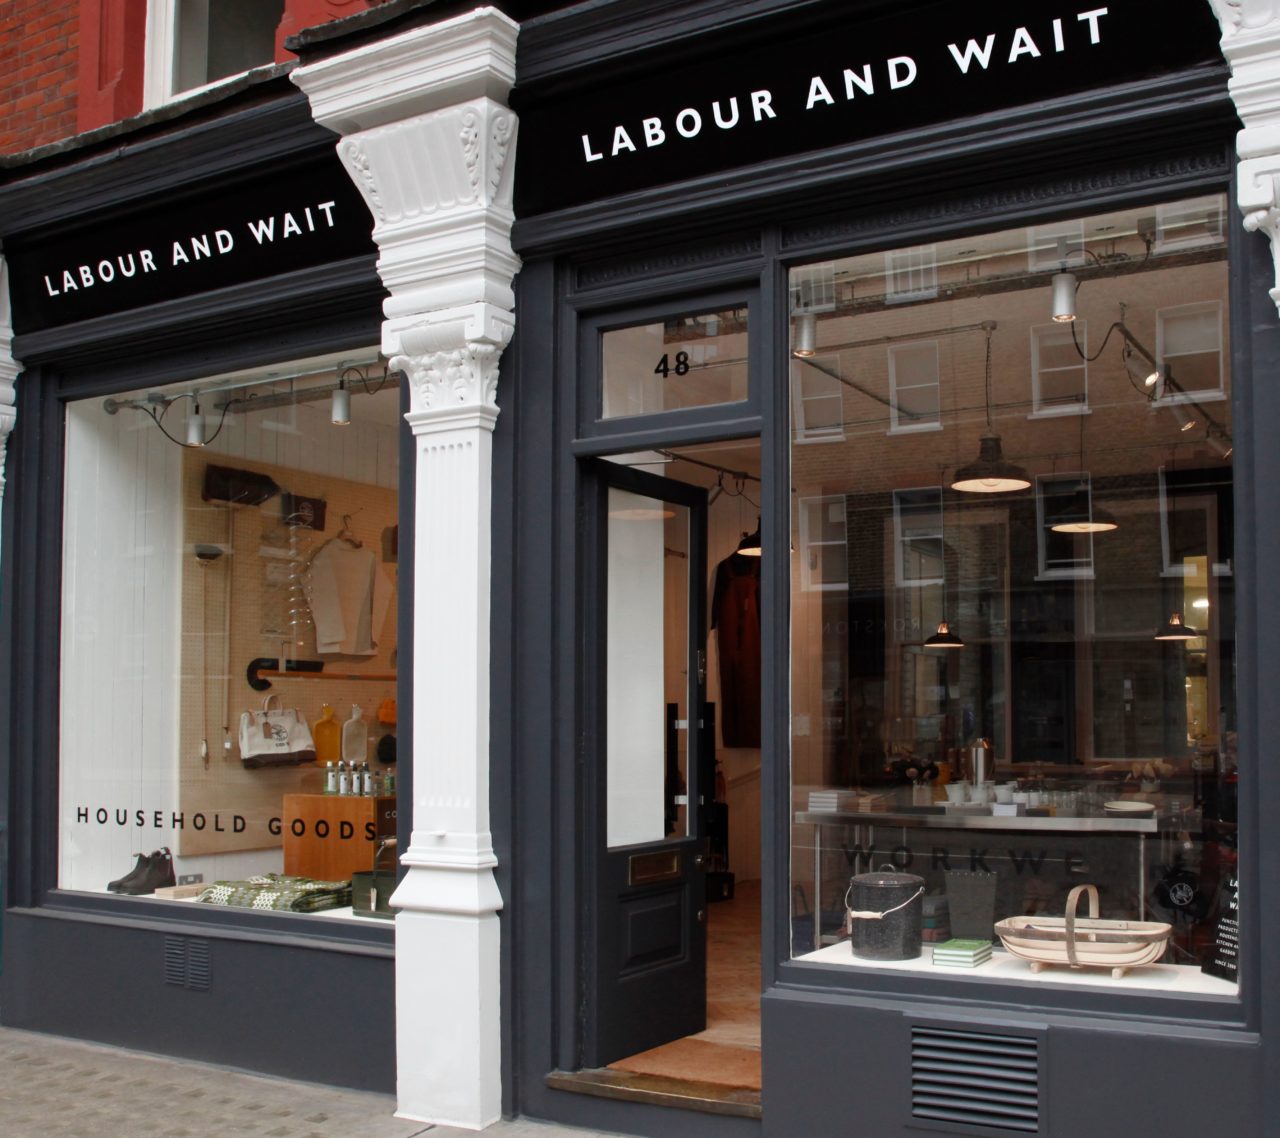 New Labour and Wait outlet